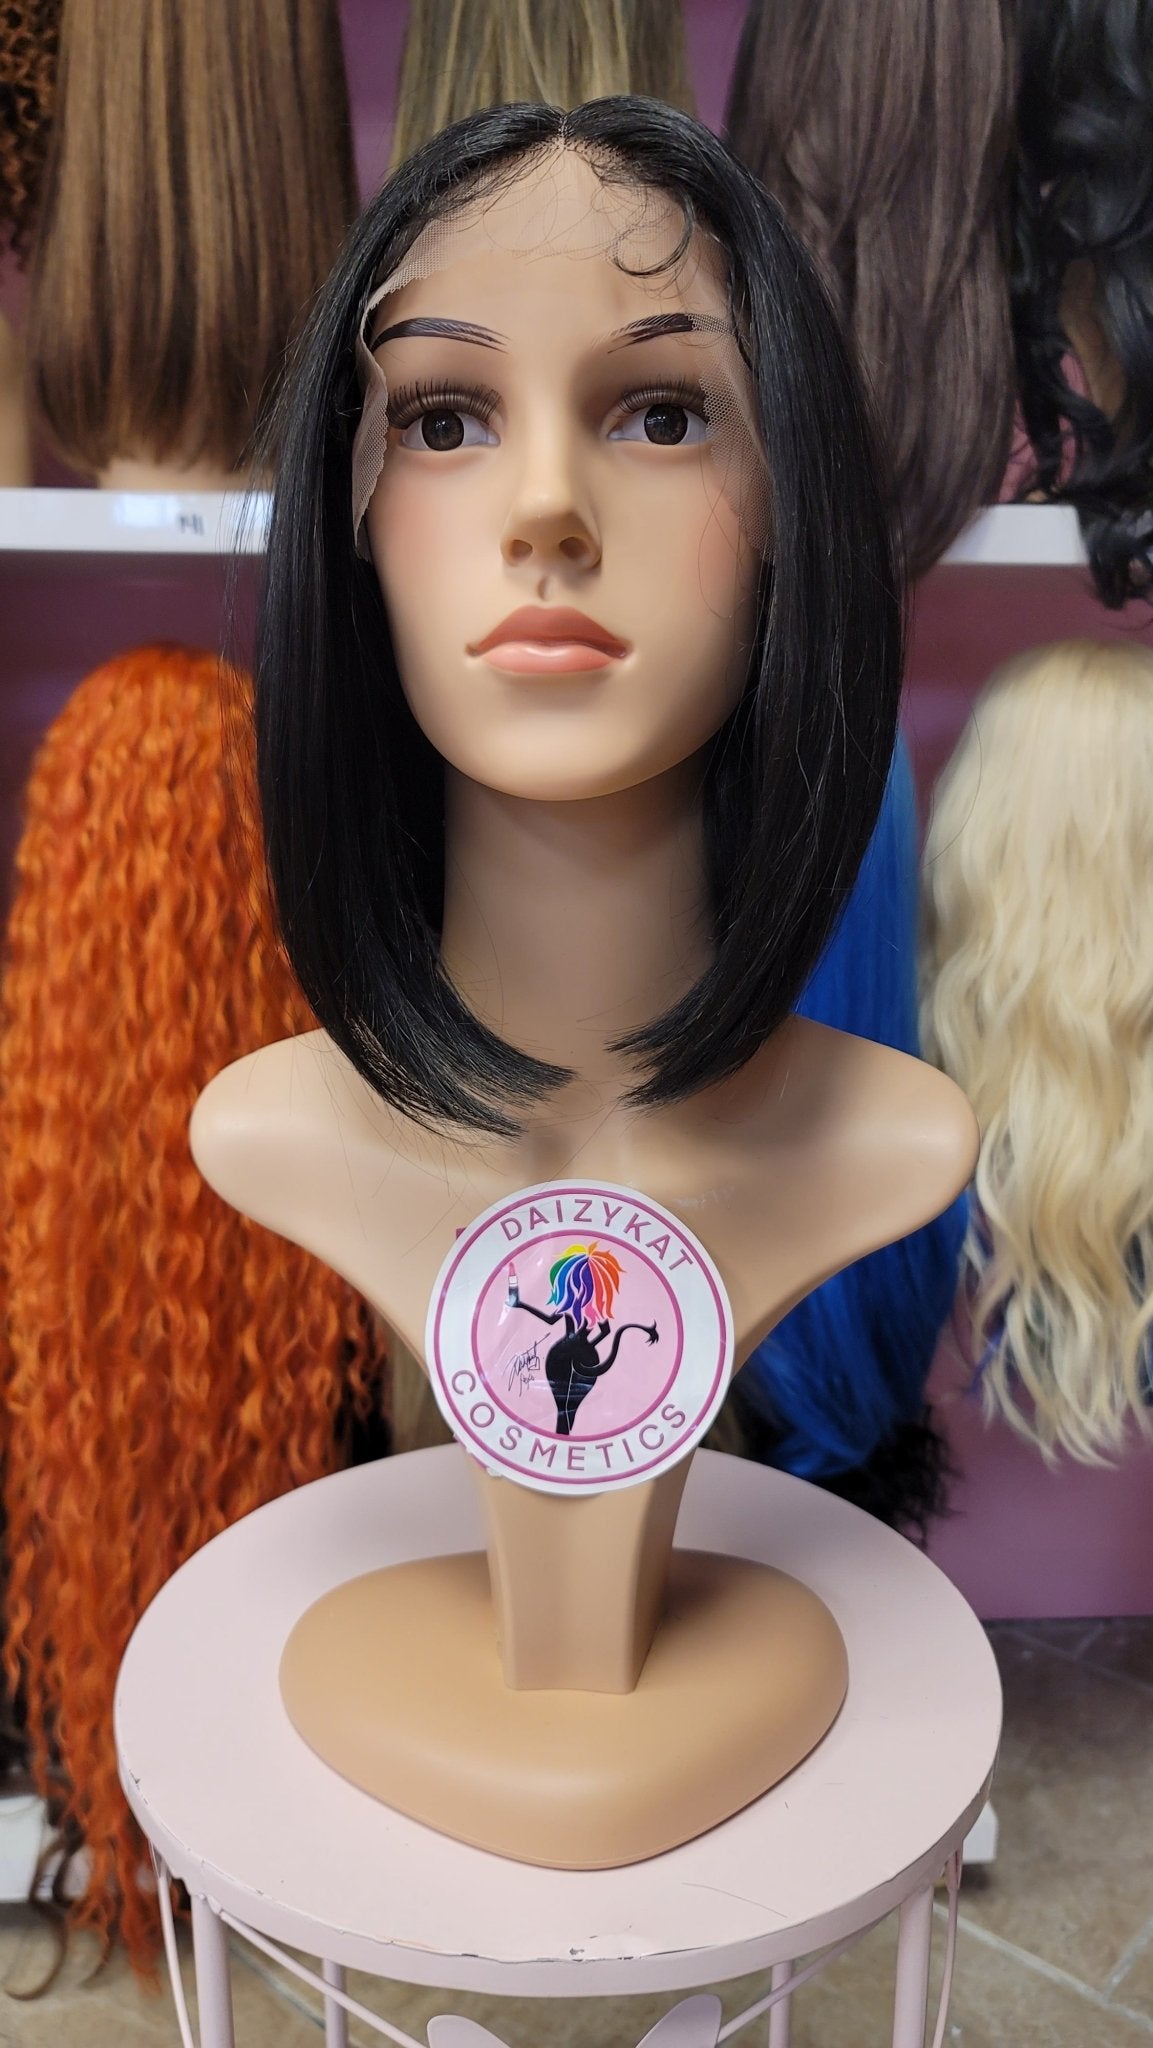 406 CHA CHA - Middle Part Lace Front Wig - 1B - DaizyKat Cosmetics 406 CHA CHA - Middle Part Lace Front Wig - 1B DaizyKat Cosmetics Wigs